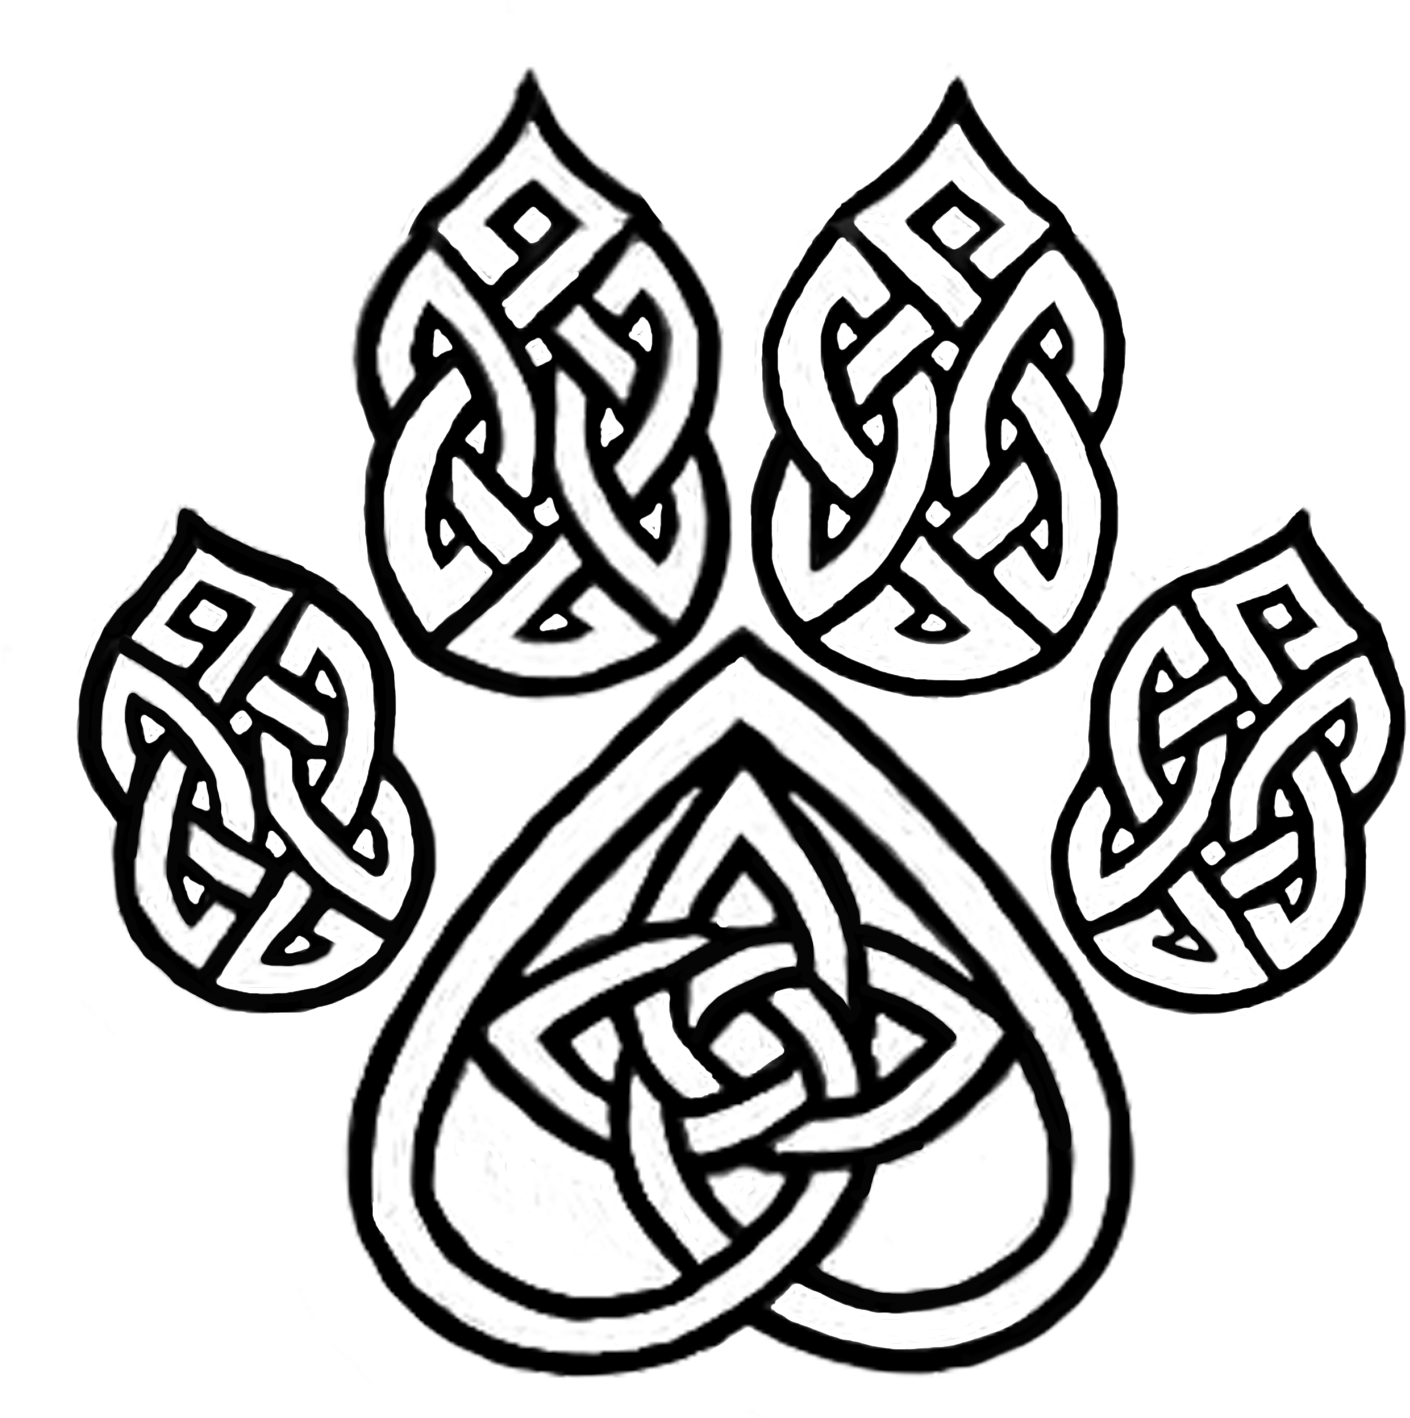 A Black And White Image Of A Paw With A Heart And A Knot